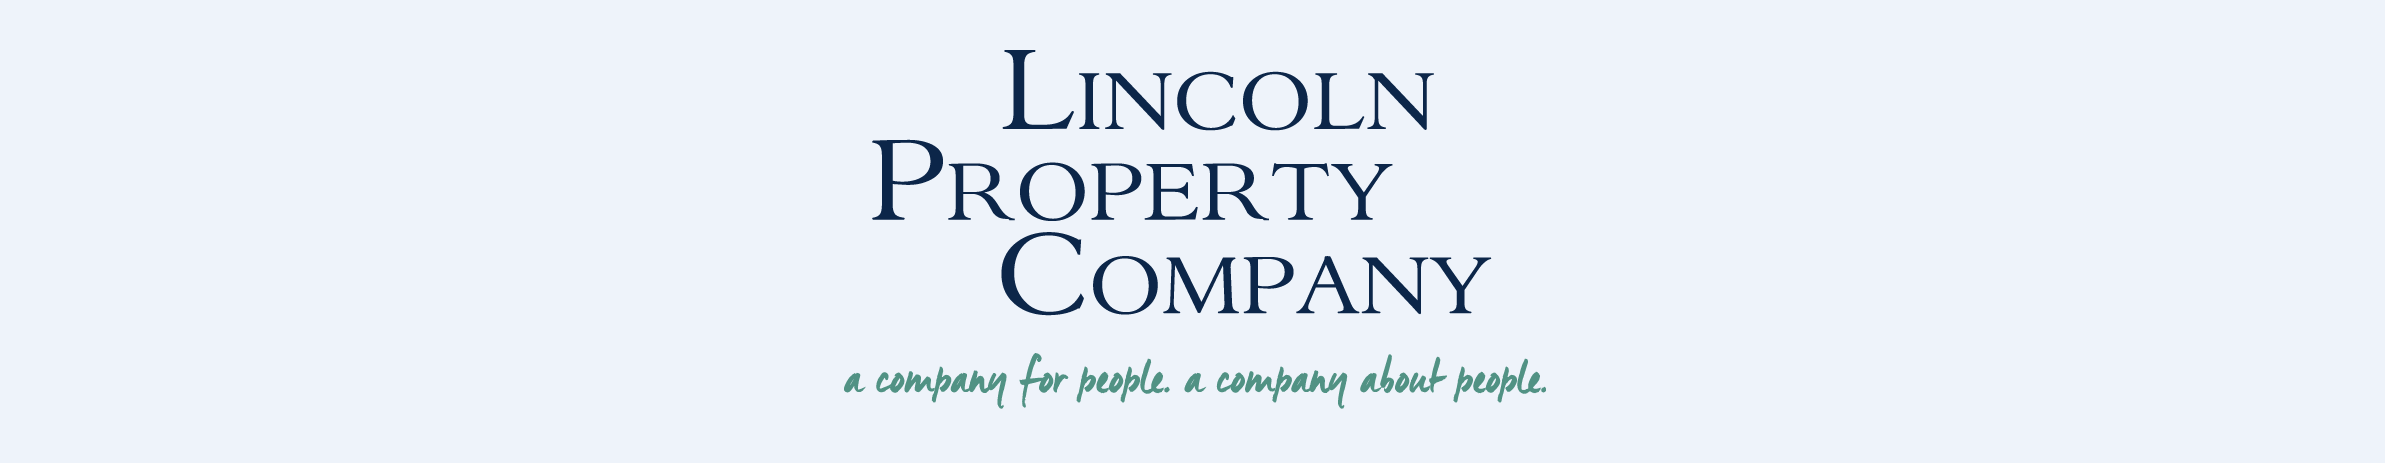 Lincoln Property Company Awarded Management Company of the Year